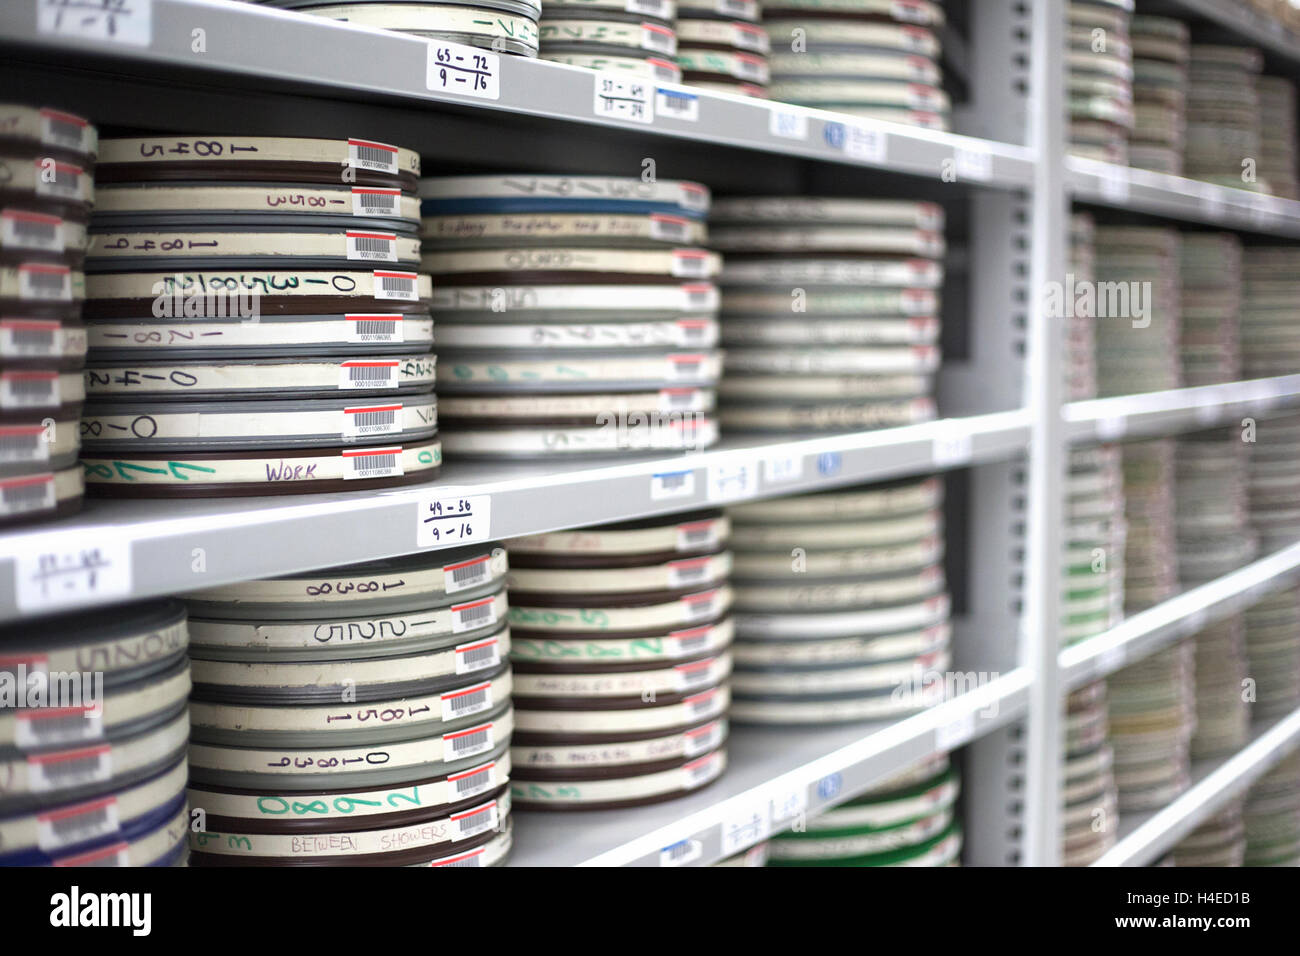 Storage reels in a high density library, an off-site environmentally controlled storage and preservation facility for university references. Stock Photo